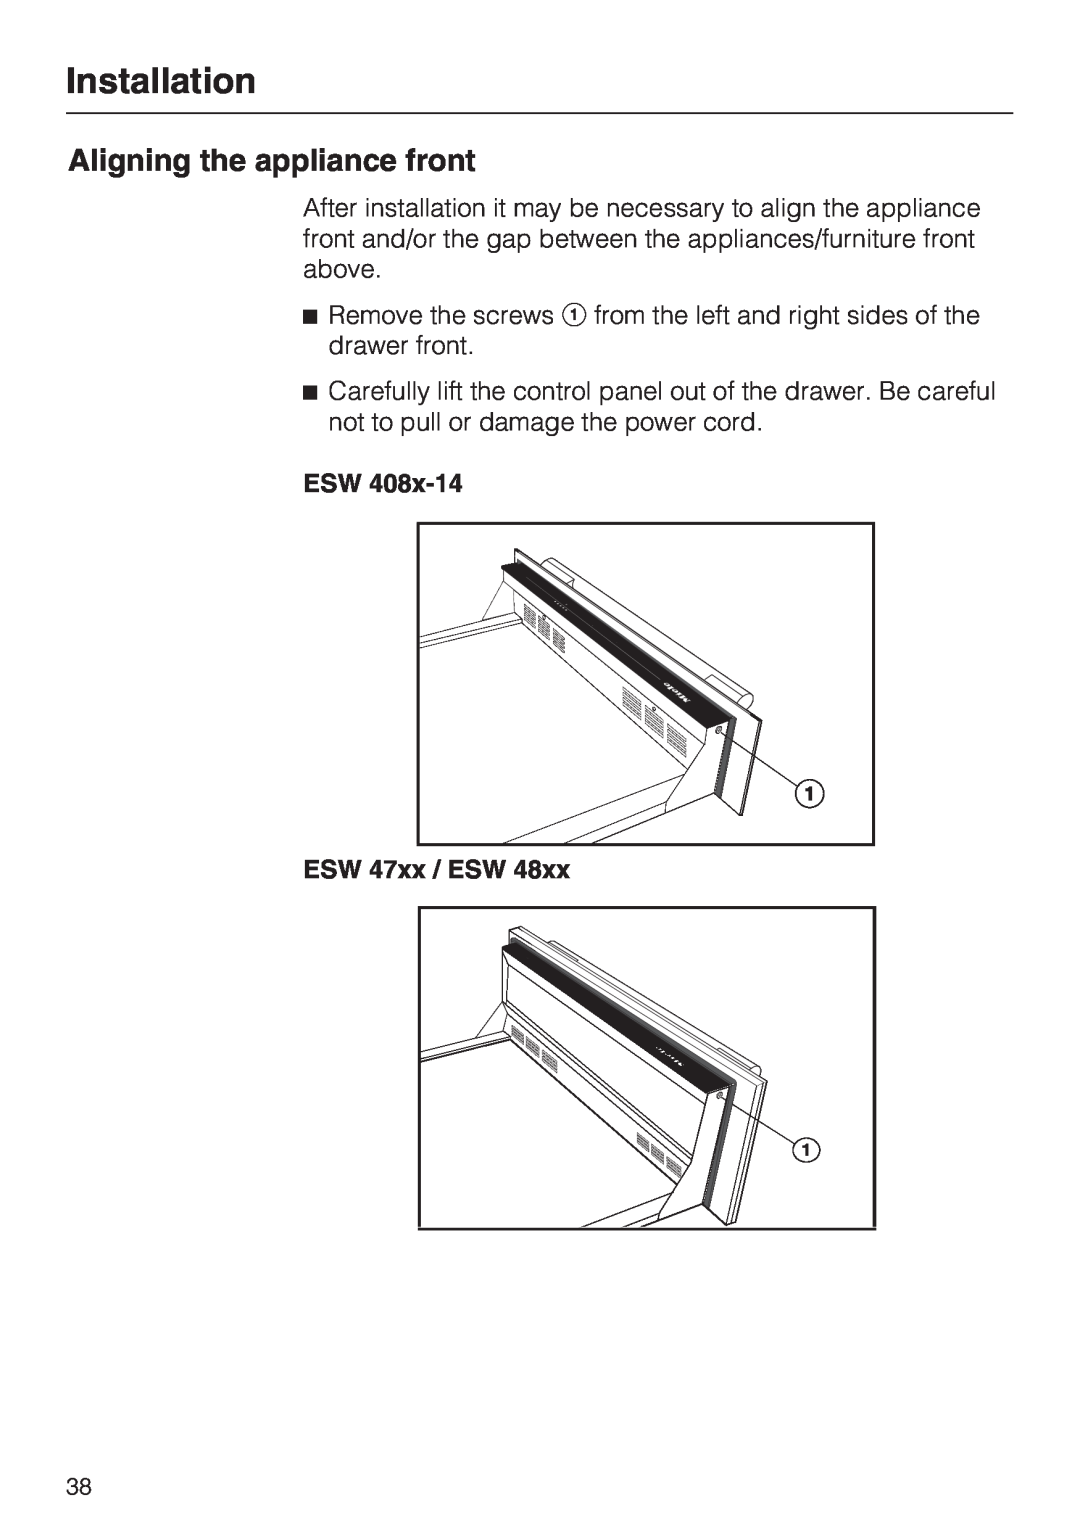 Miele ESW48XX, ESW 408X-14 installation instructions Aligning the appliance front, Installation 